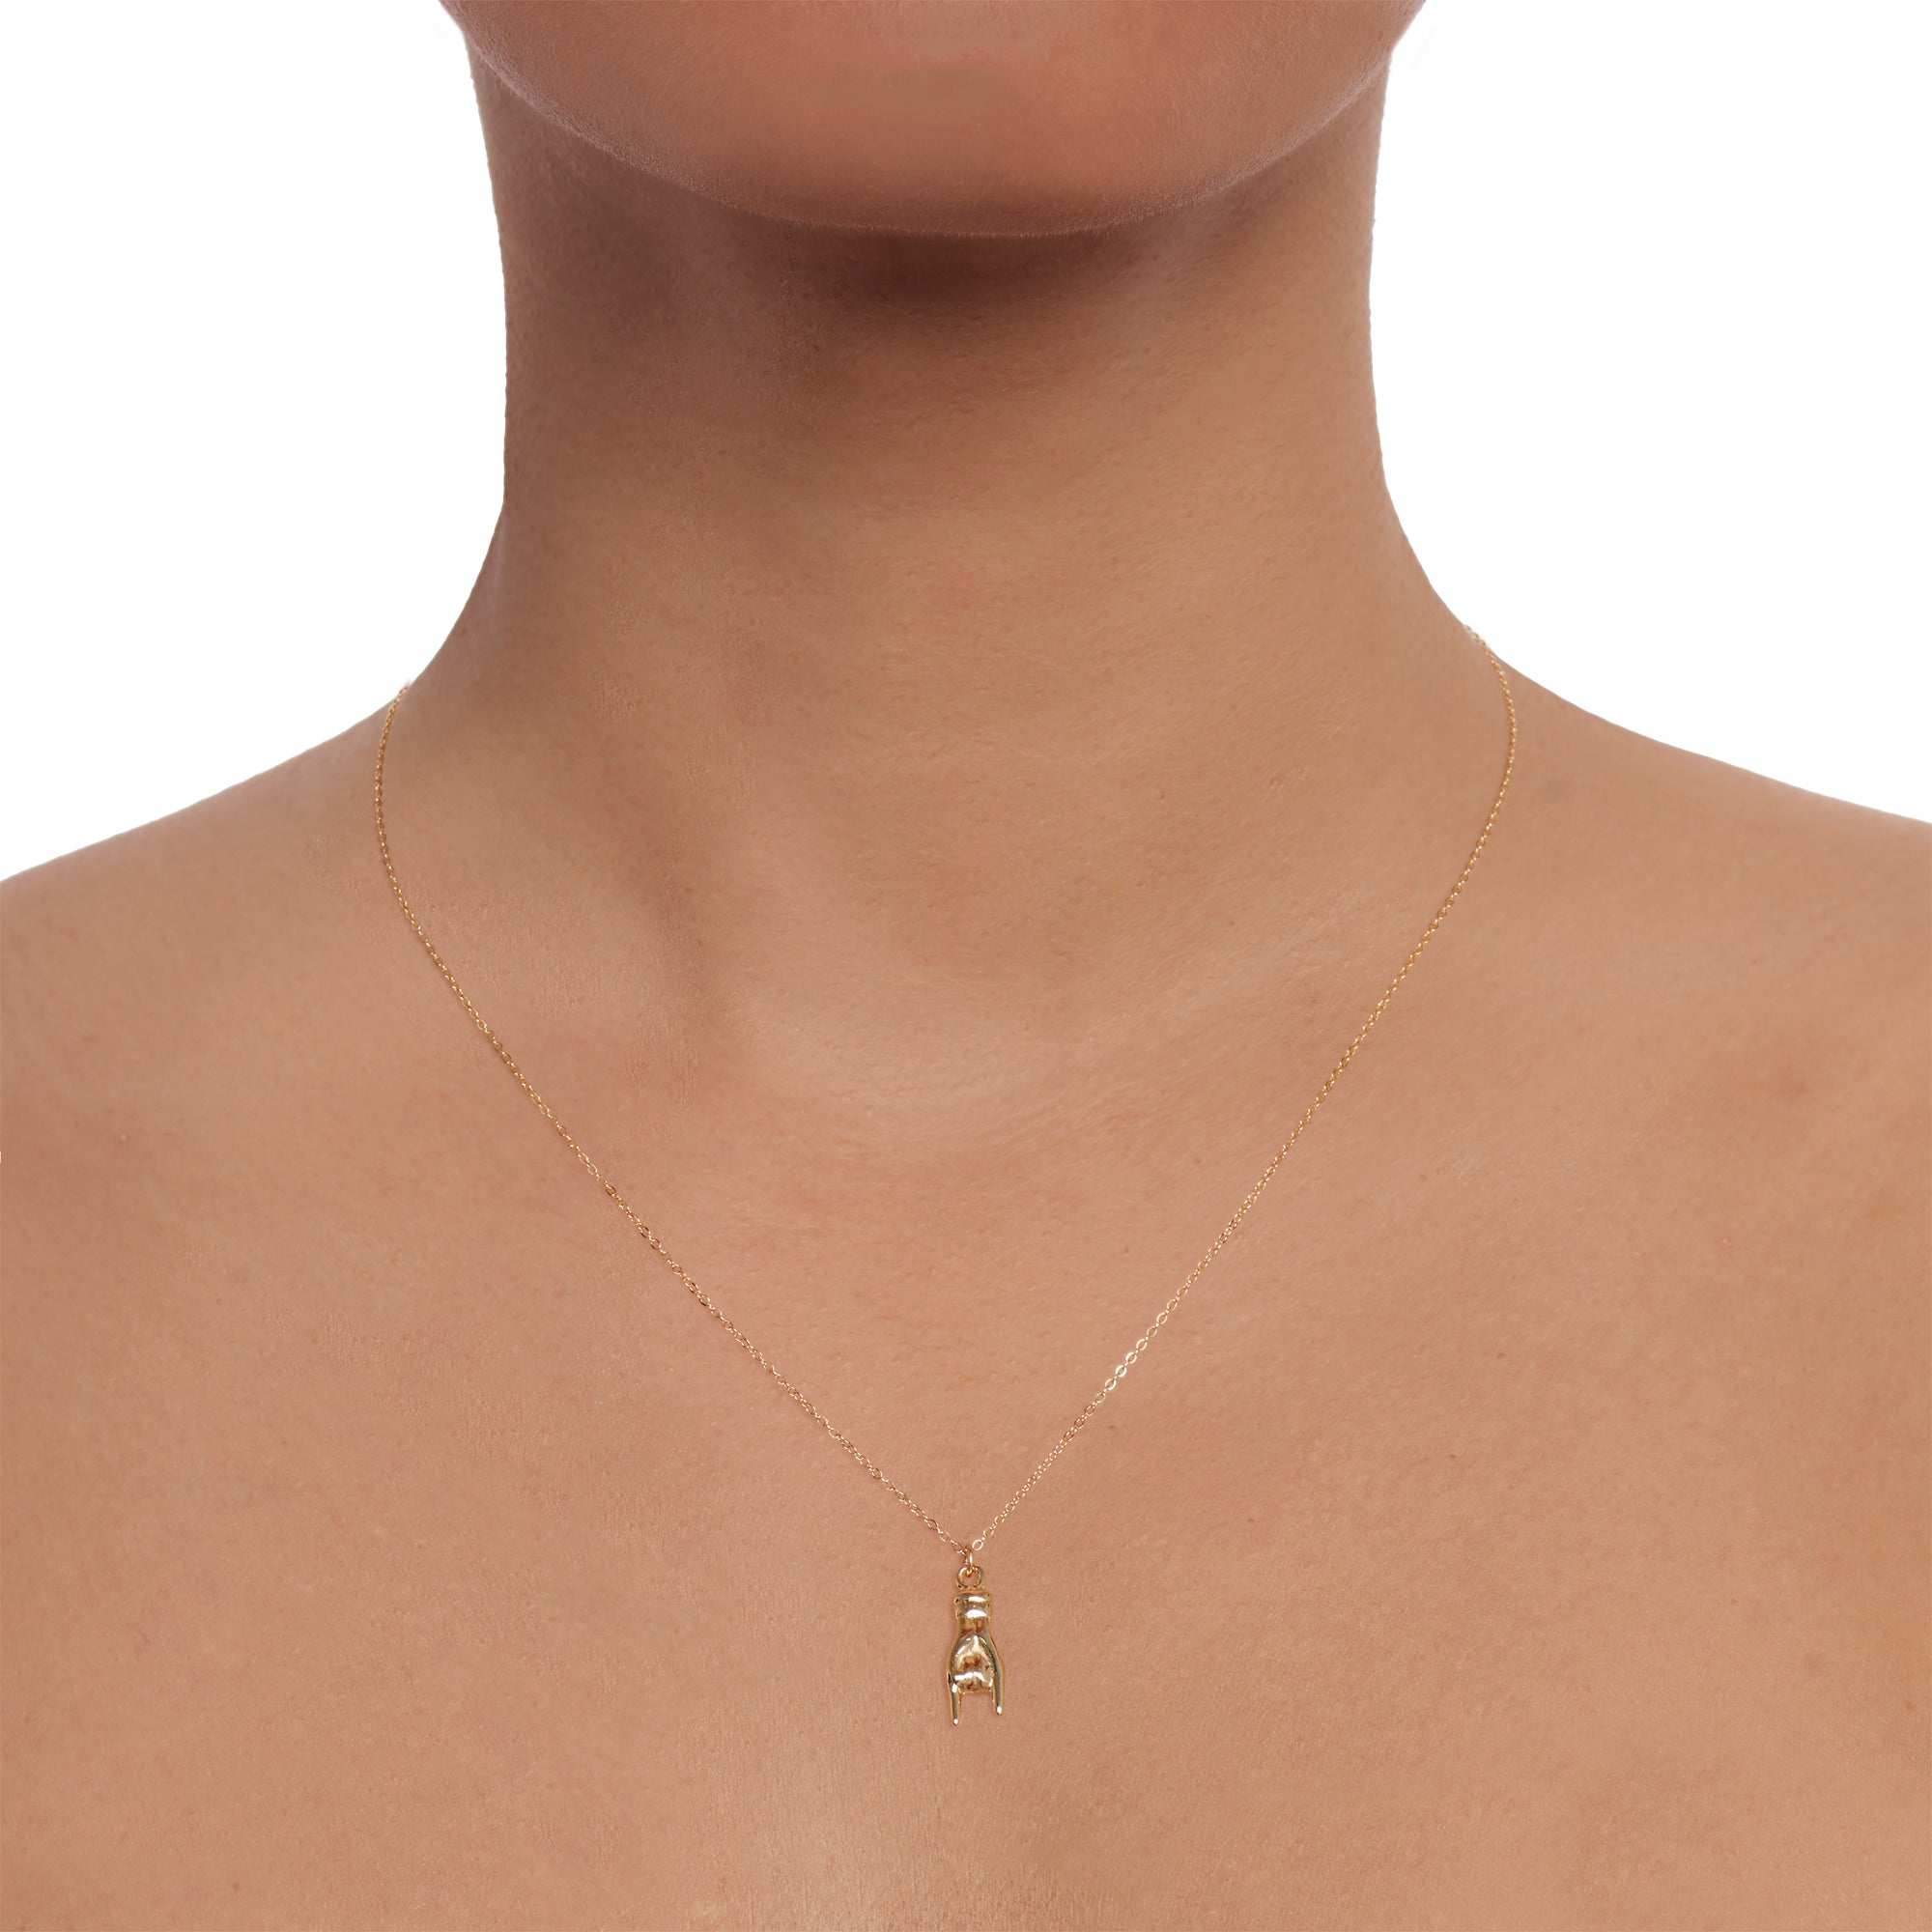 Golden Mano Cornuto Necklace - Charlie and Marcelle